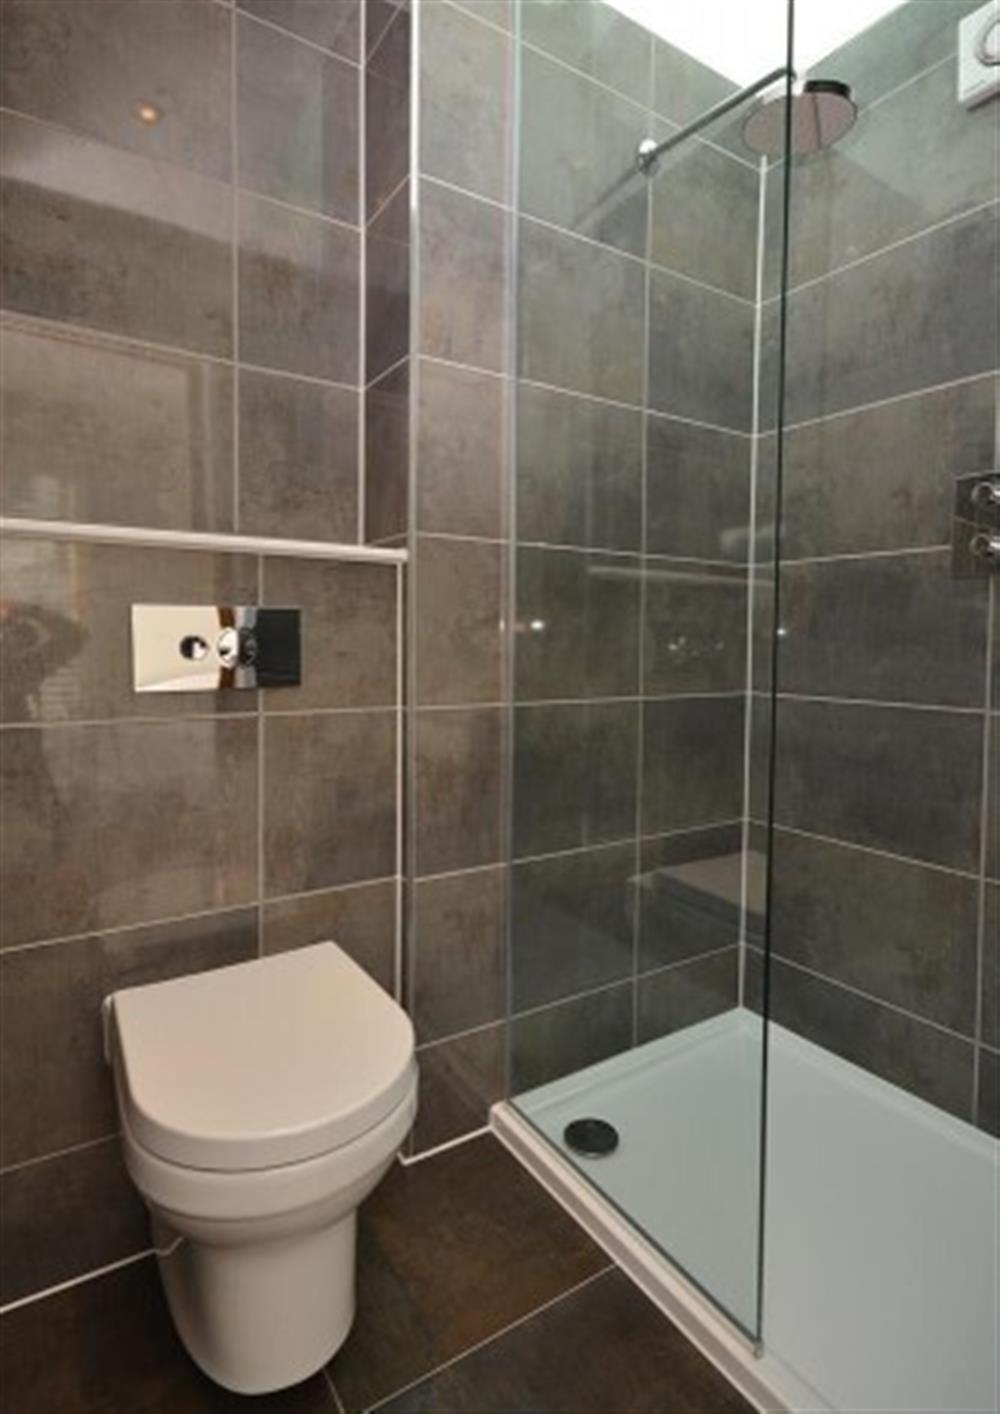 The master en-suite shower room at 1 Talland in Talland Bay